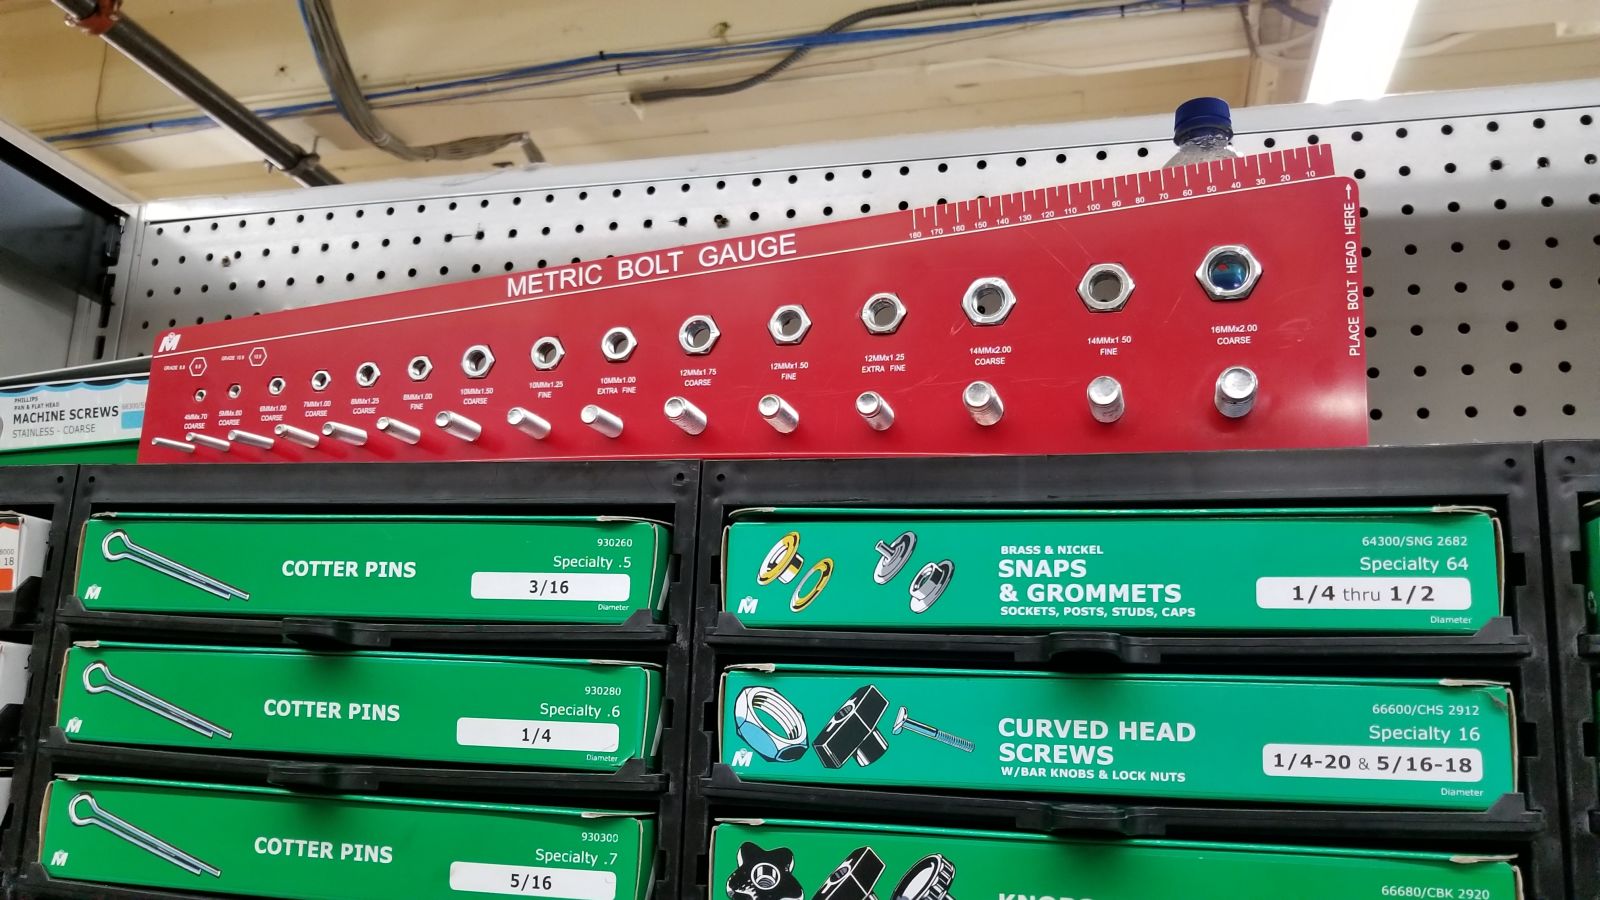 Saw this thread checker/gauge at homedepot and immediately ordered a better version for the shop. Little things like this will go a long way towards increasing efficiency 